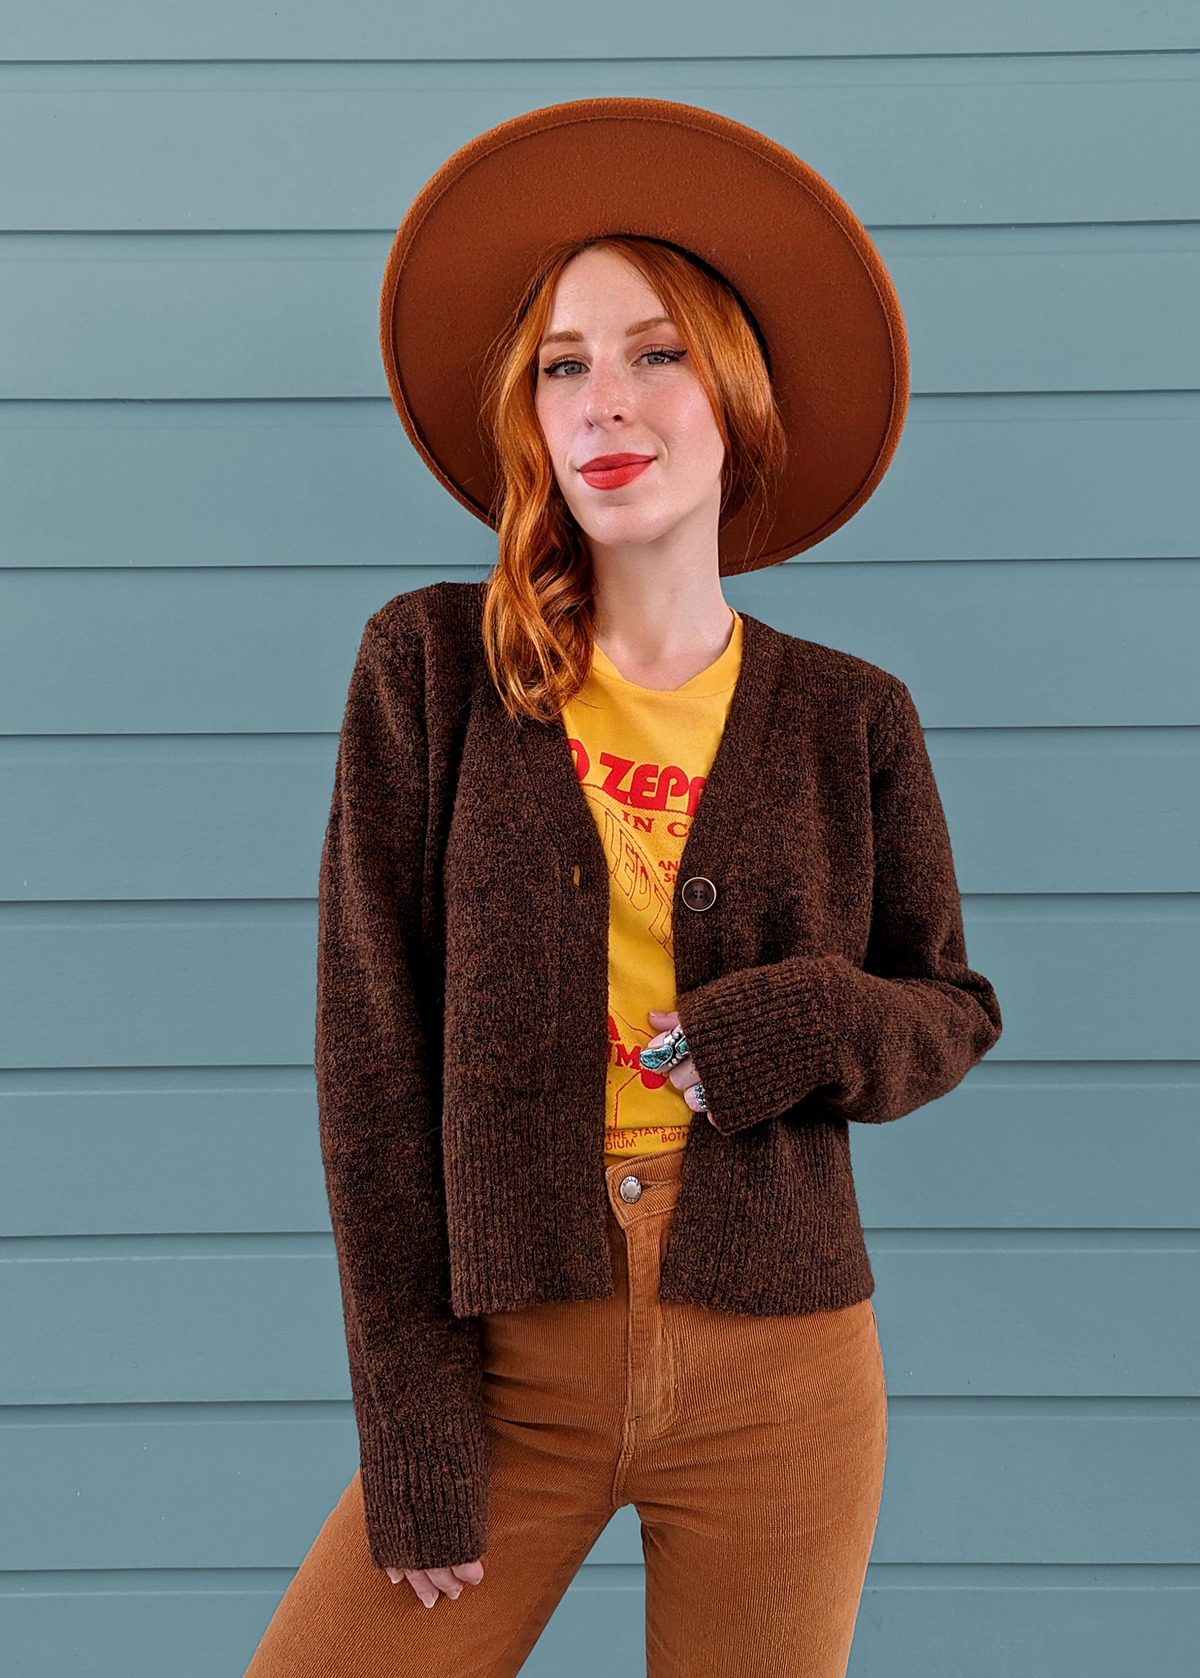 Cinnamon Brown Marl slouchy one button knit cardigan by Nice Things by Paloma S.